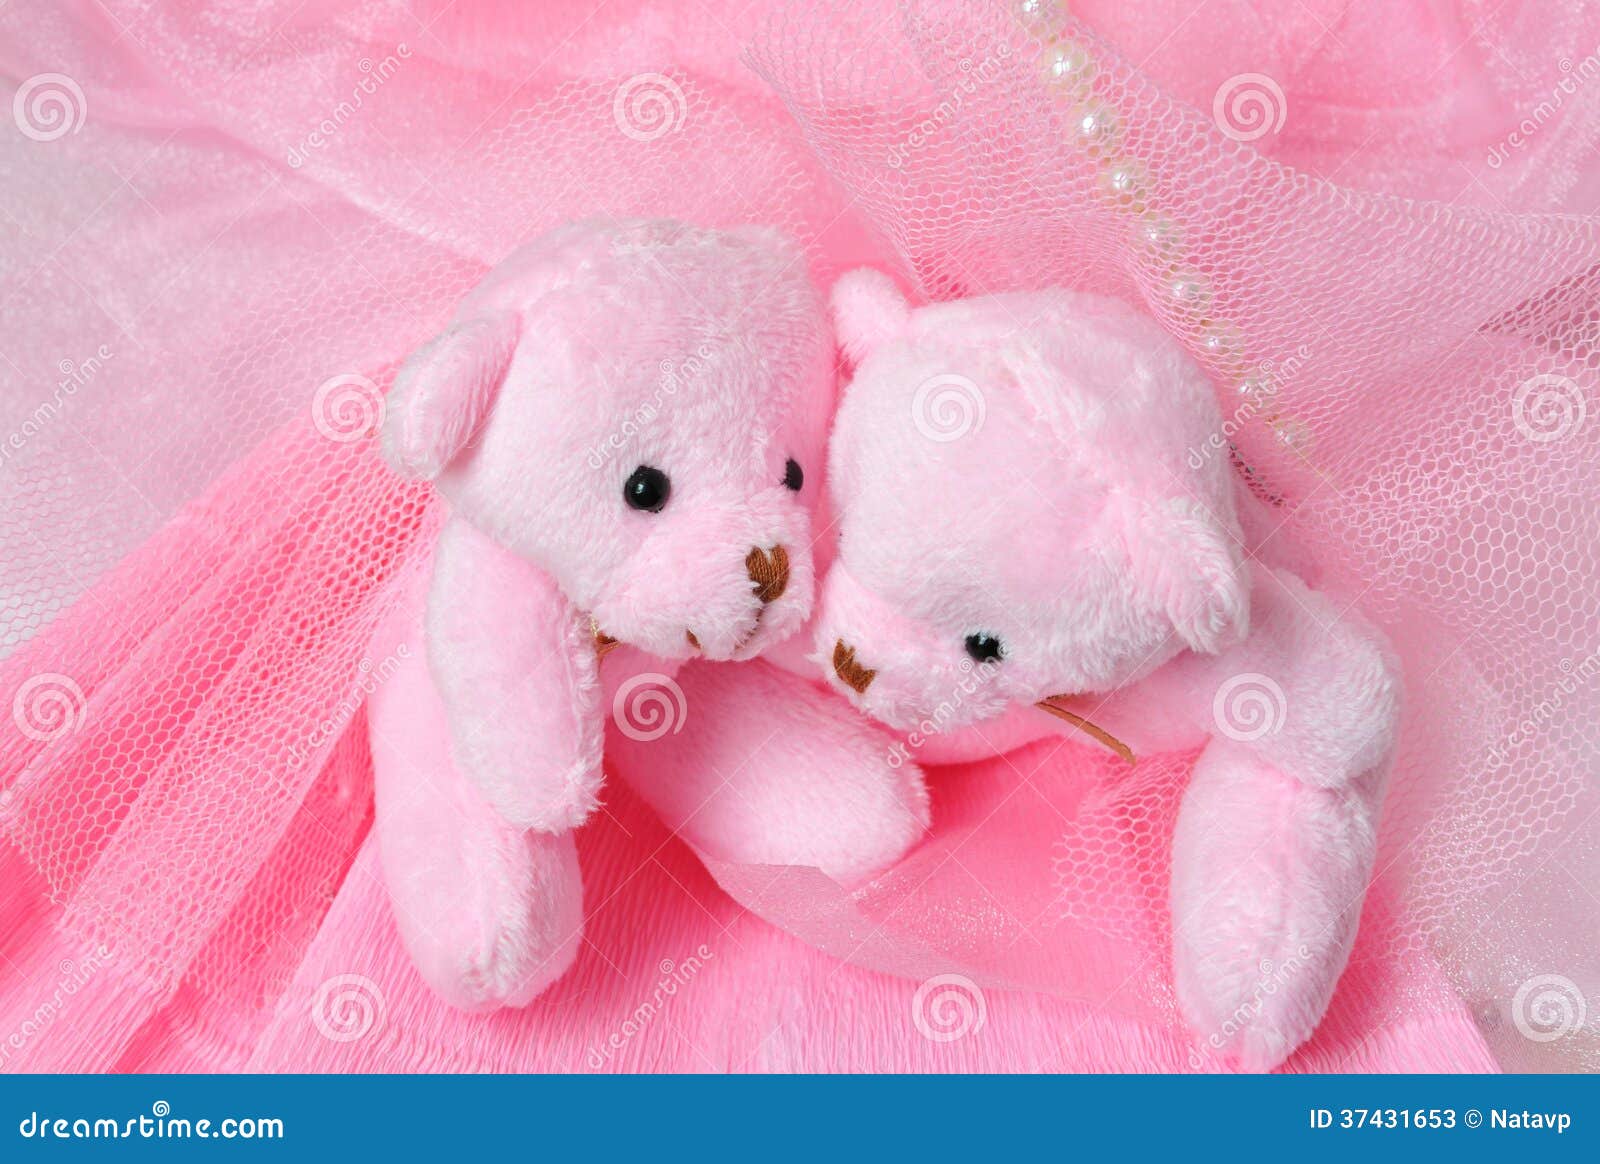 Two Amusing Pink Teddy Bear on Pink Stock Image - Image of bear ...